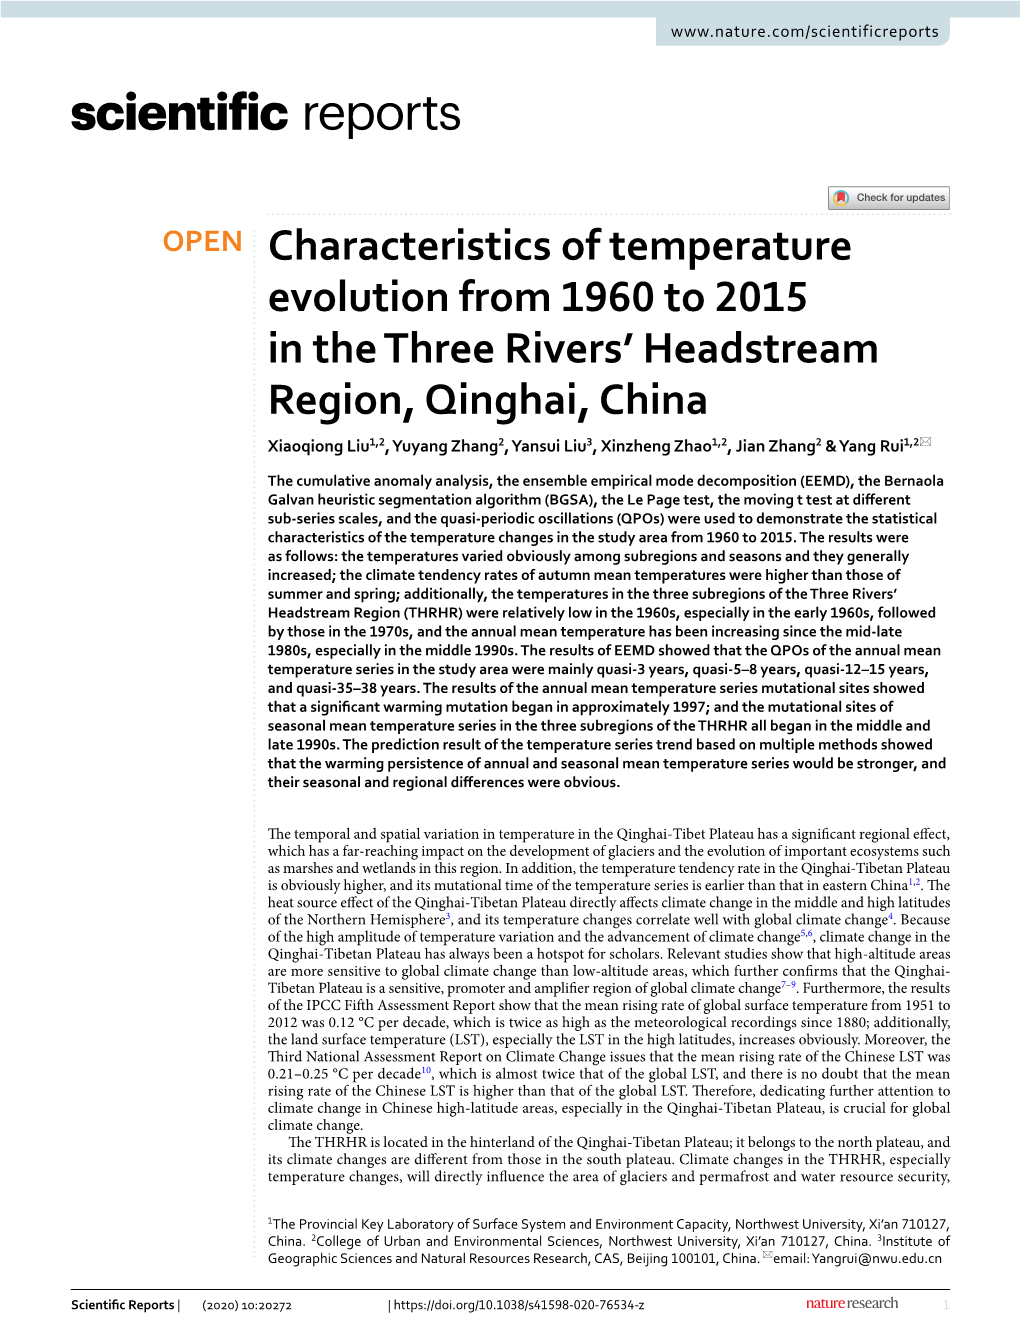 Characteristics of Temperature Evolution from 1960 to 2015 in The